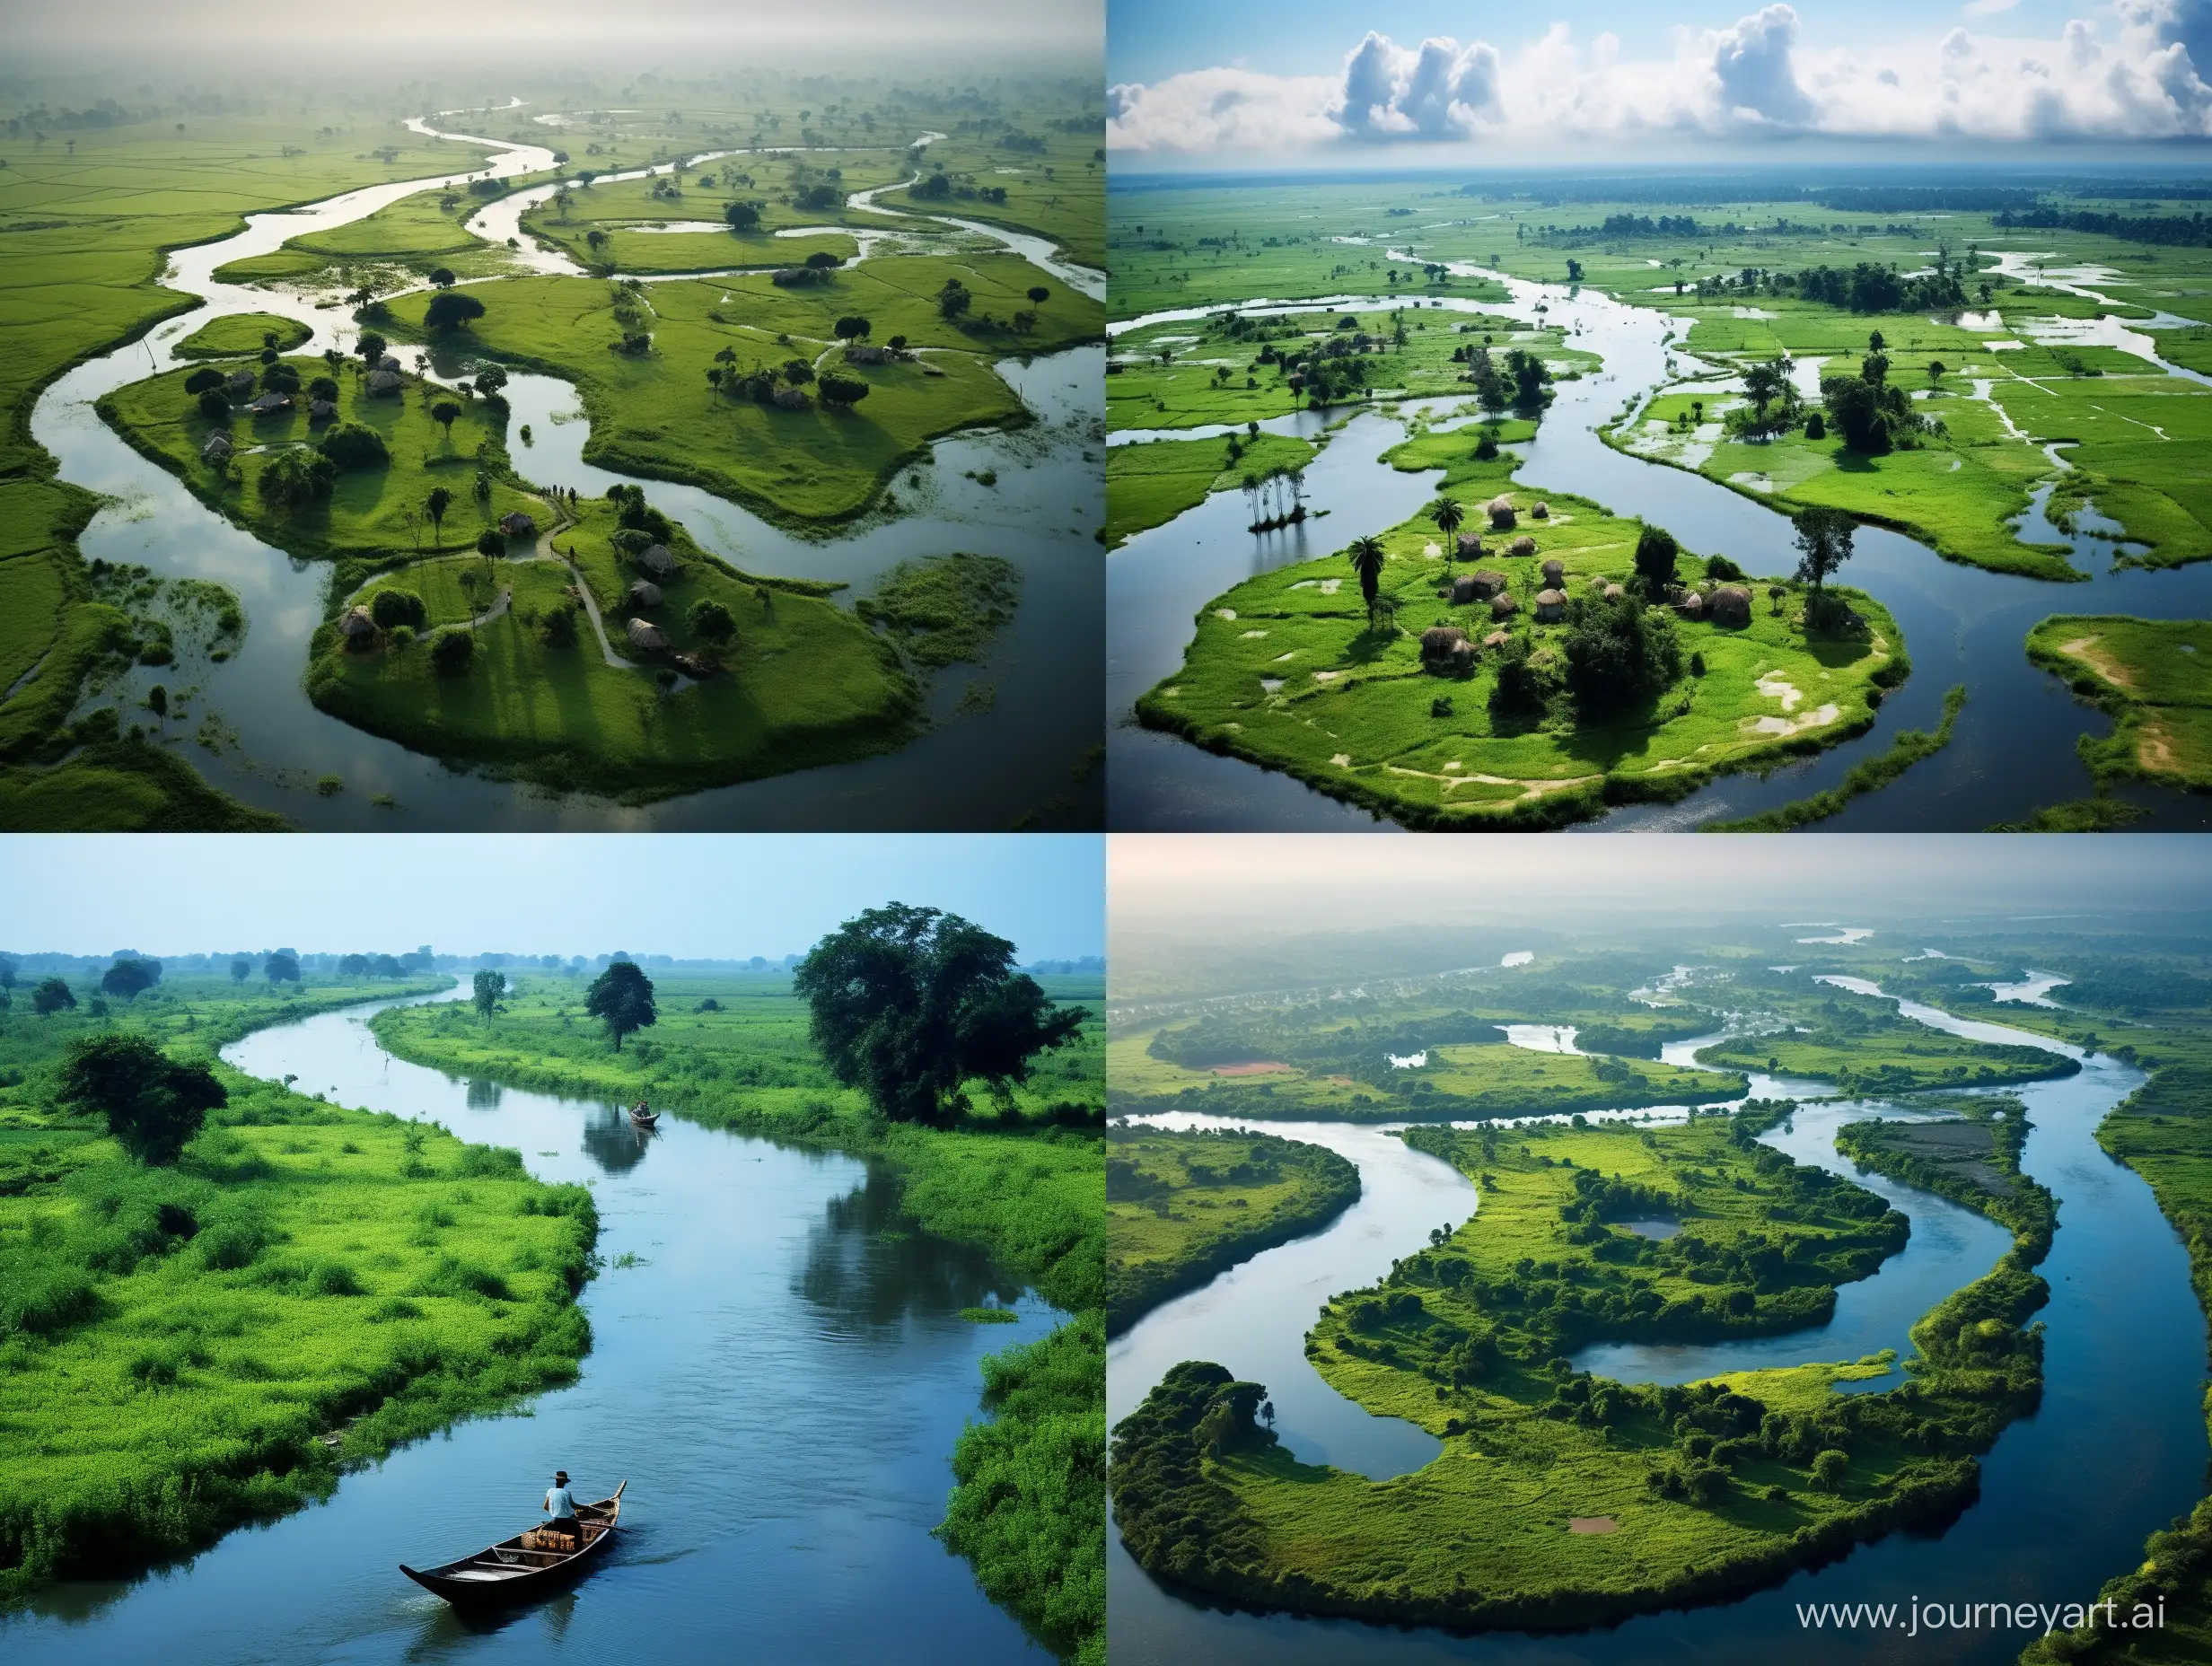 Bangladesh has the world's largest riverine island, Majuli, which is constantly changing its shape due to erosion and sedimentation.